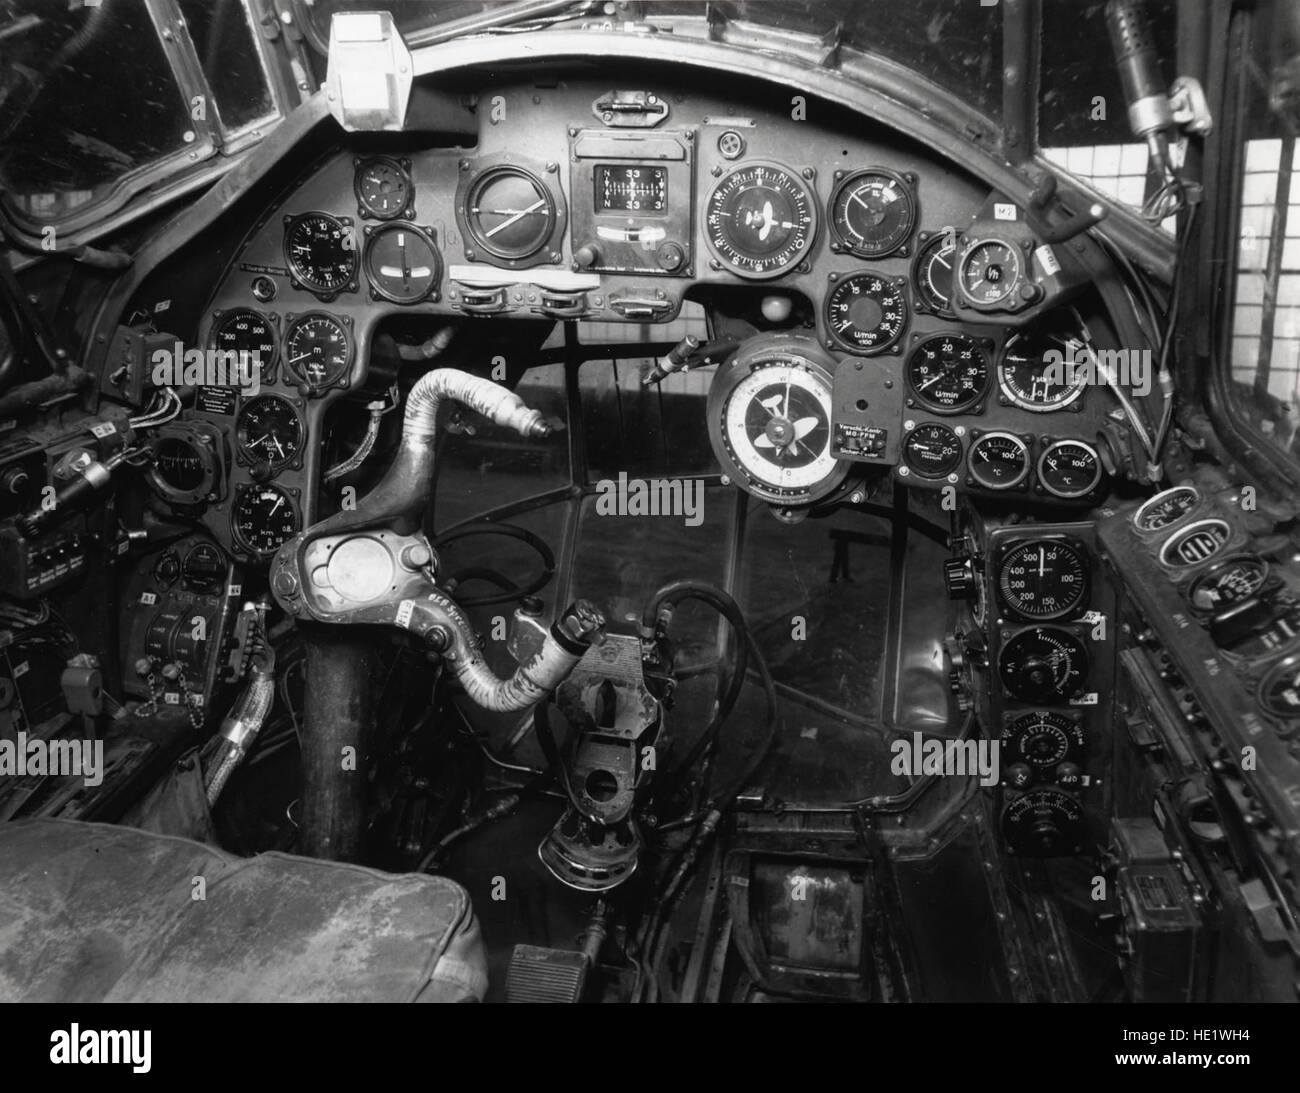 The cockpit of a Junkers Ju 88D, which served in the German Luftwaffe in numerous variants, from bomber to night-fighter, during WWII, after arrival at Wright Field in 1943  in Dayton, Ohio. A defecting Romanian pilot flew his Ju 88 to Cyprus and in the hands of the British in 1943. The Royal Air Force then turned the aircraft over to the U.S. Army Air Corps, who painted the U.S. Air Force star on the fuselage and wings to spare it from Allied attacks as it made its way across the globe to Wright Field. Photo courtesy of National Museum of the United States Air Force Stock Photo